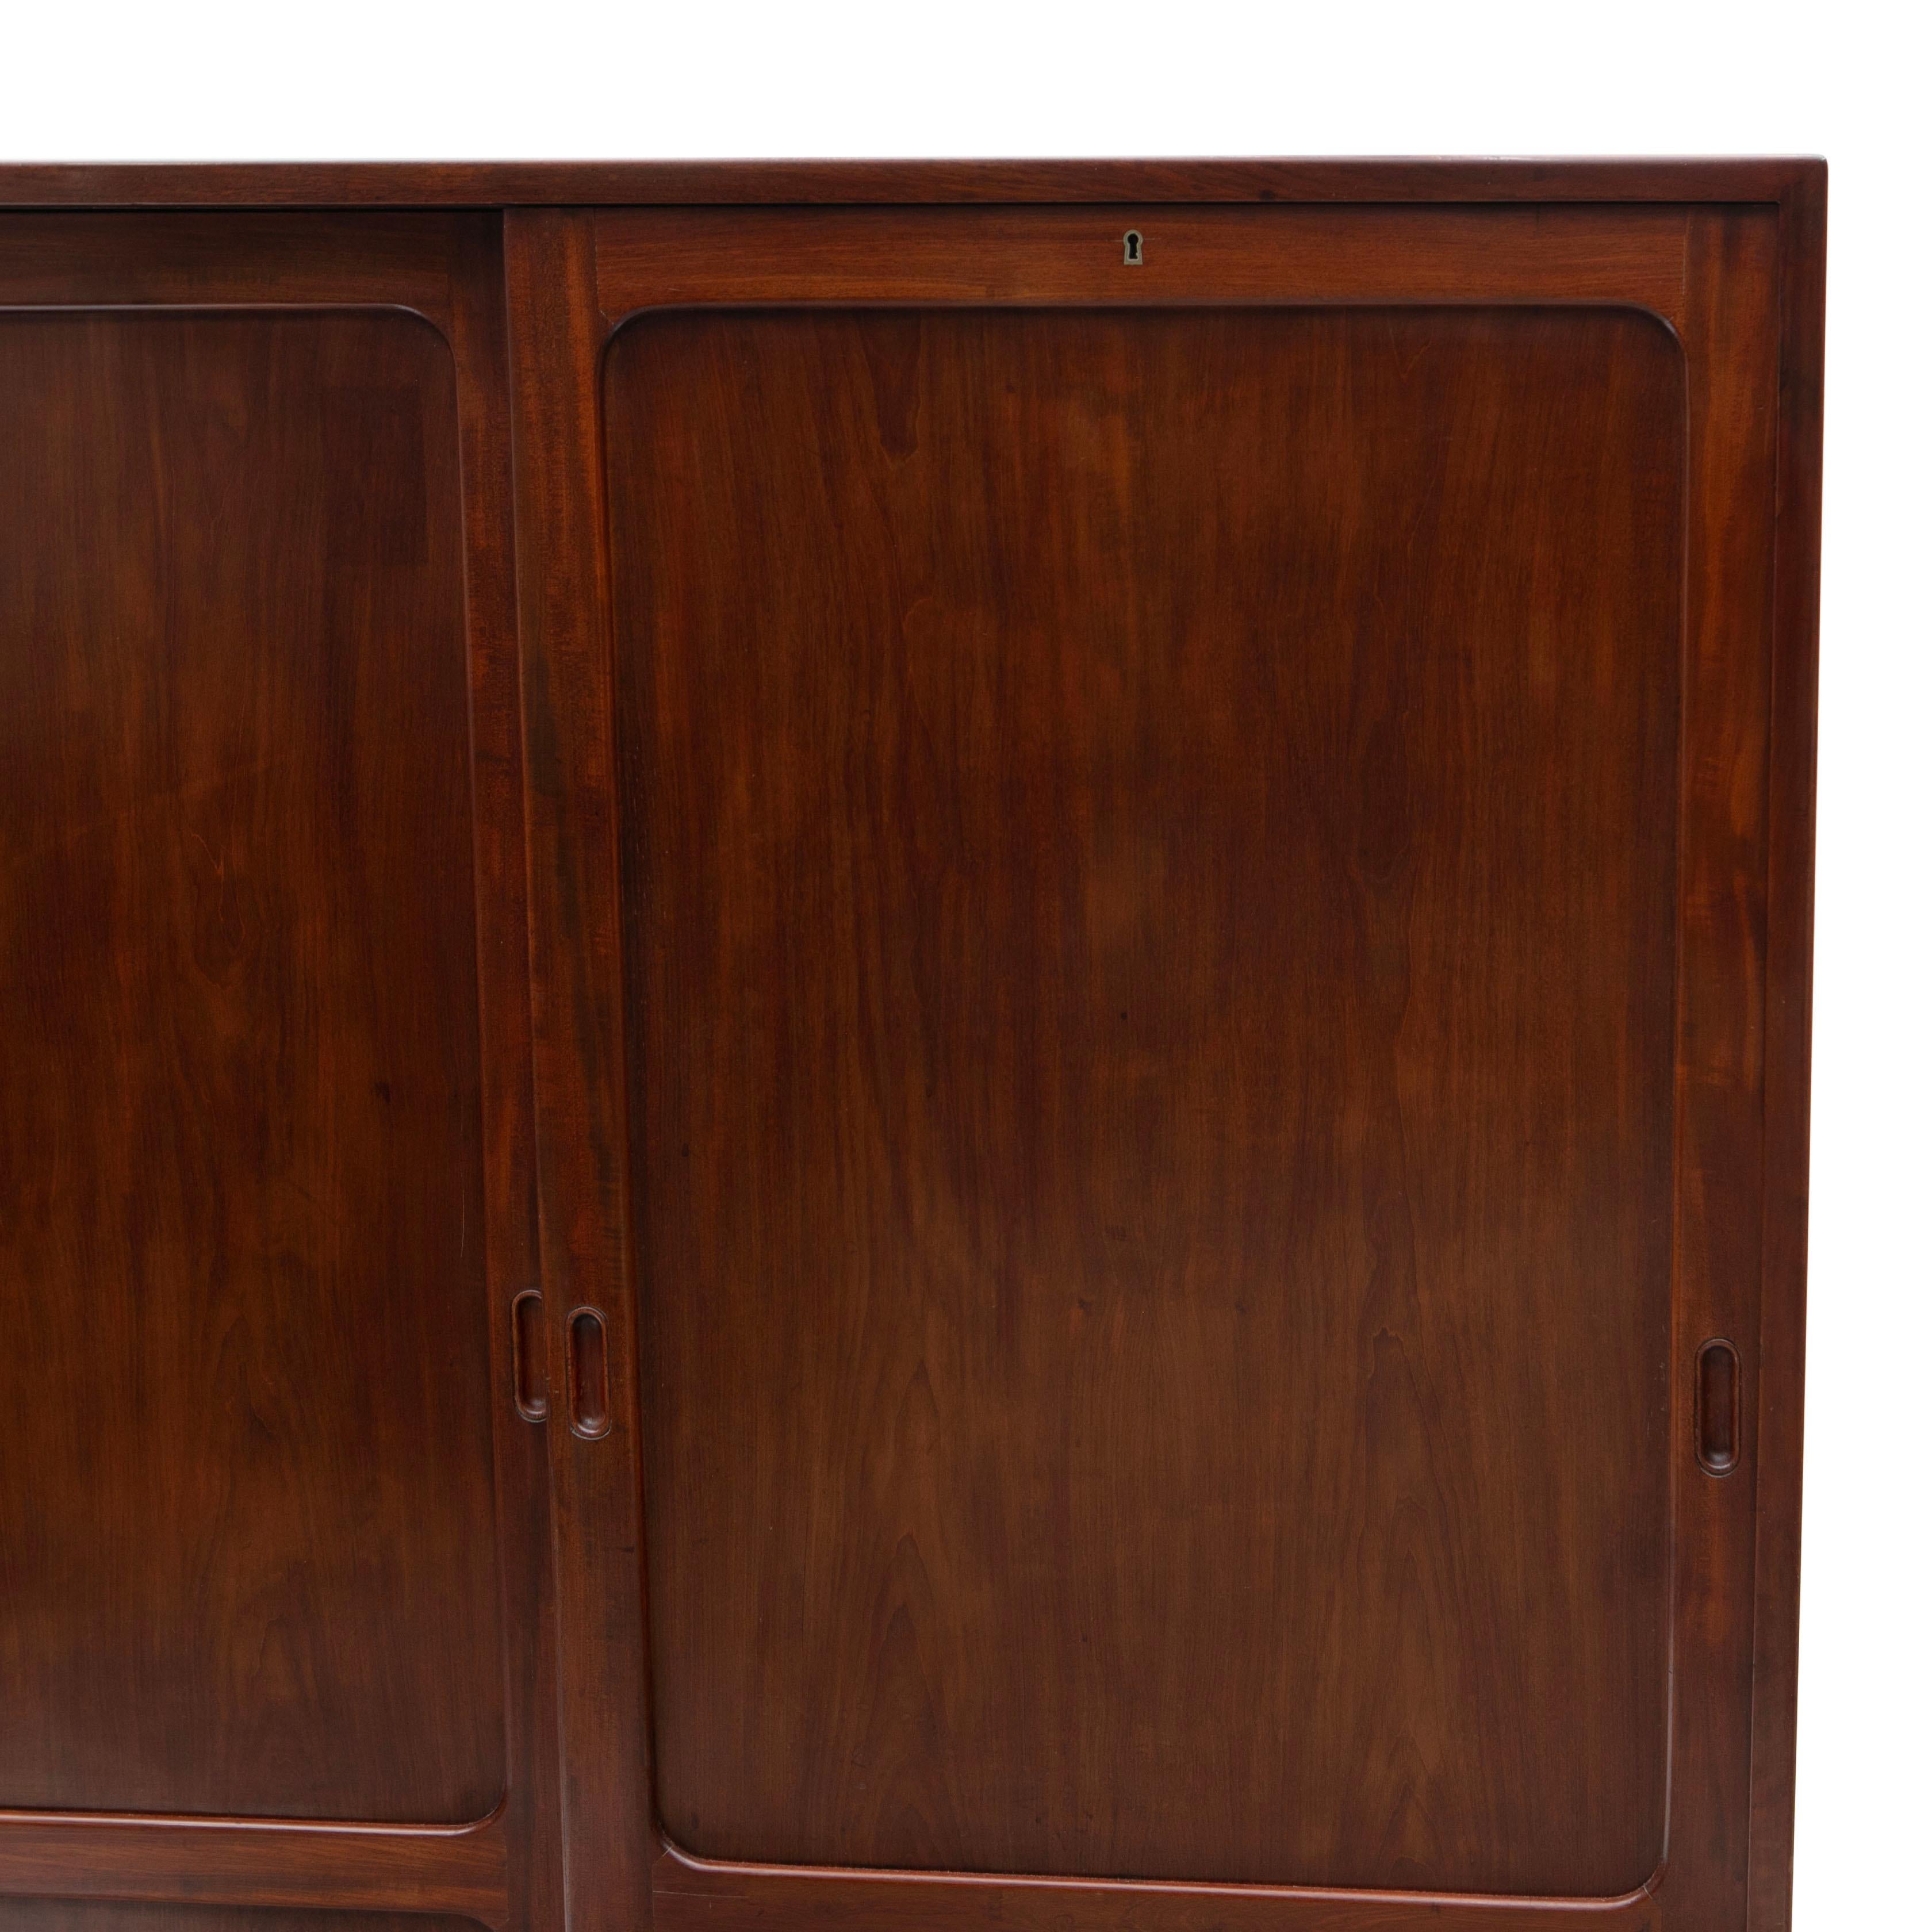 Kaare Klint, 1888-1954
Filling or office cabinet crafted in solid Cuban mahogany with two sliding door with smooth sliding mechanism, that opens up to multiple shelves. Resting on a rosewood base, rails for sliding doors crafted in ebony.
Designed